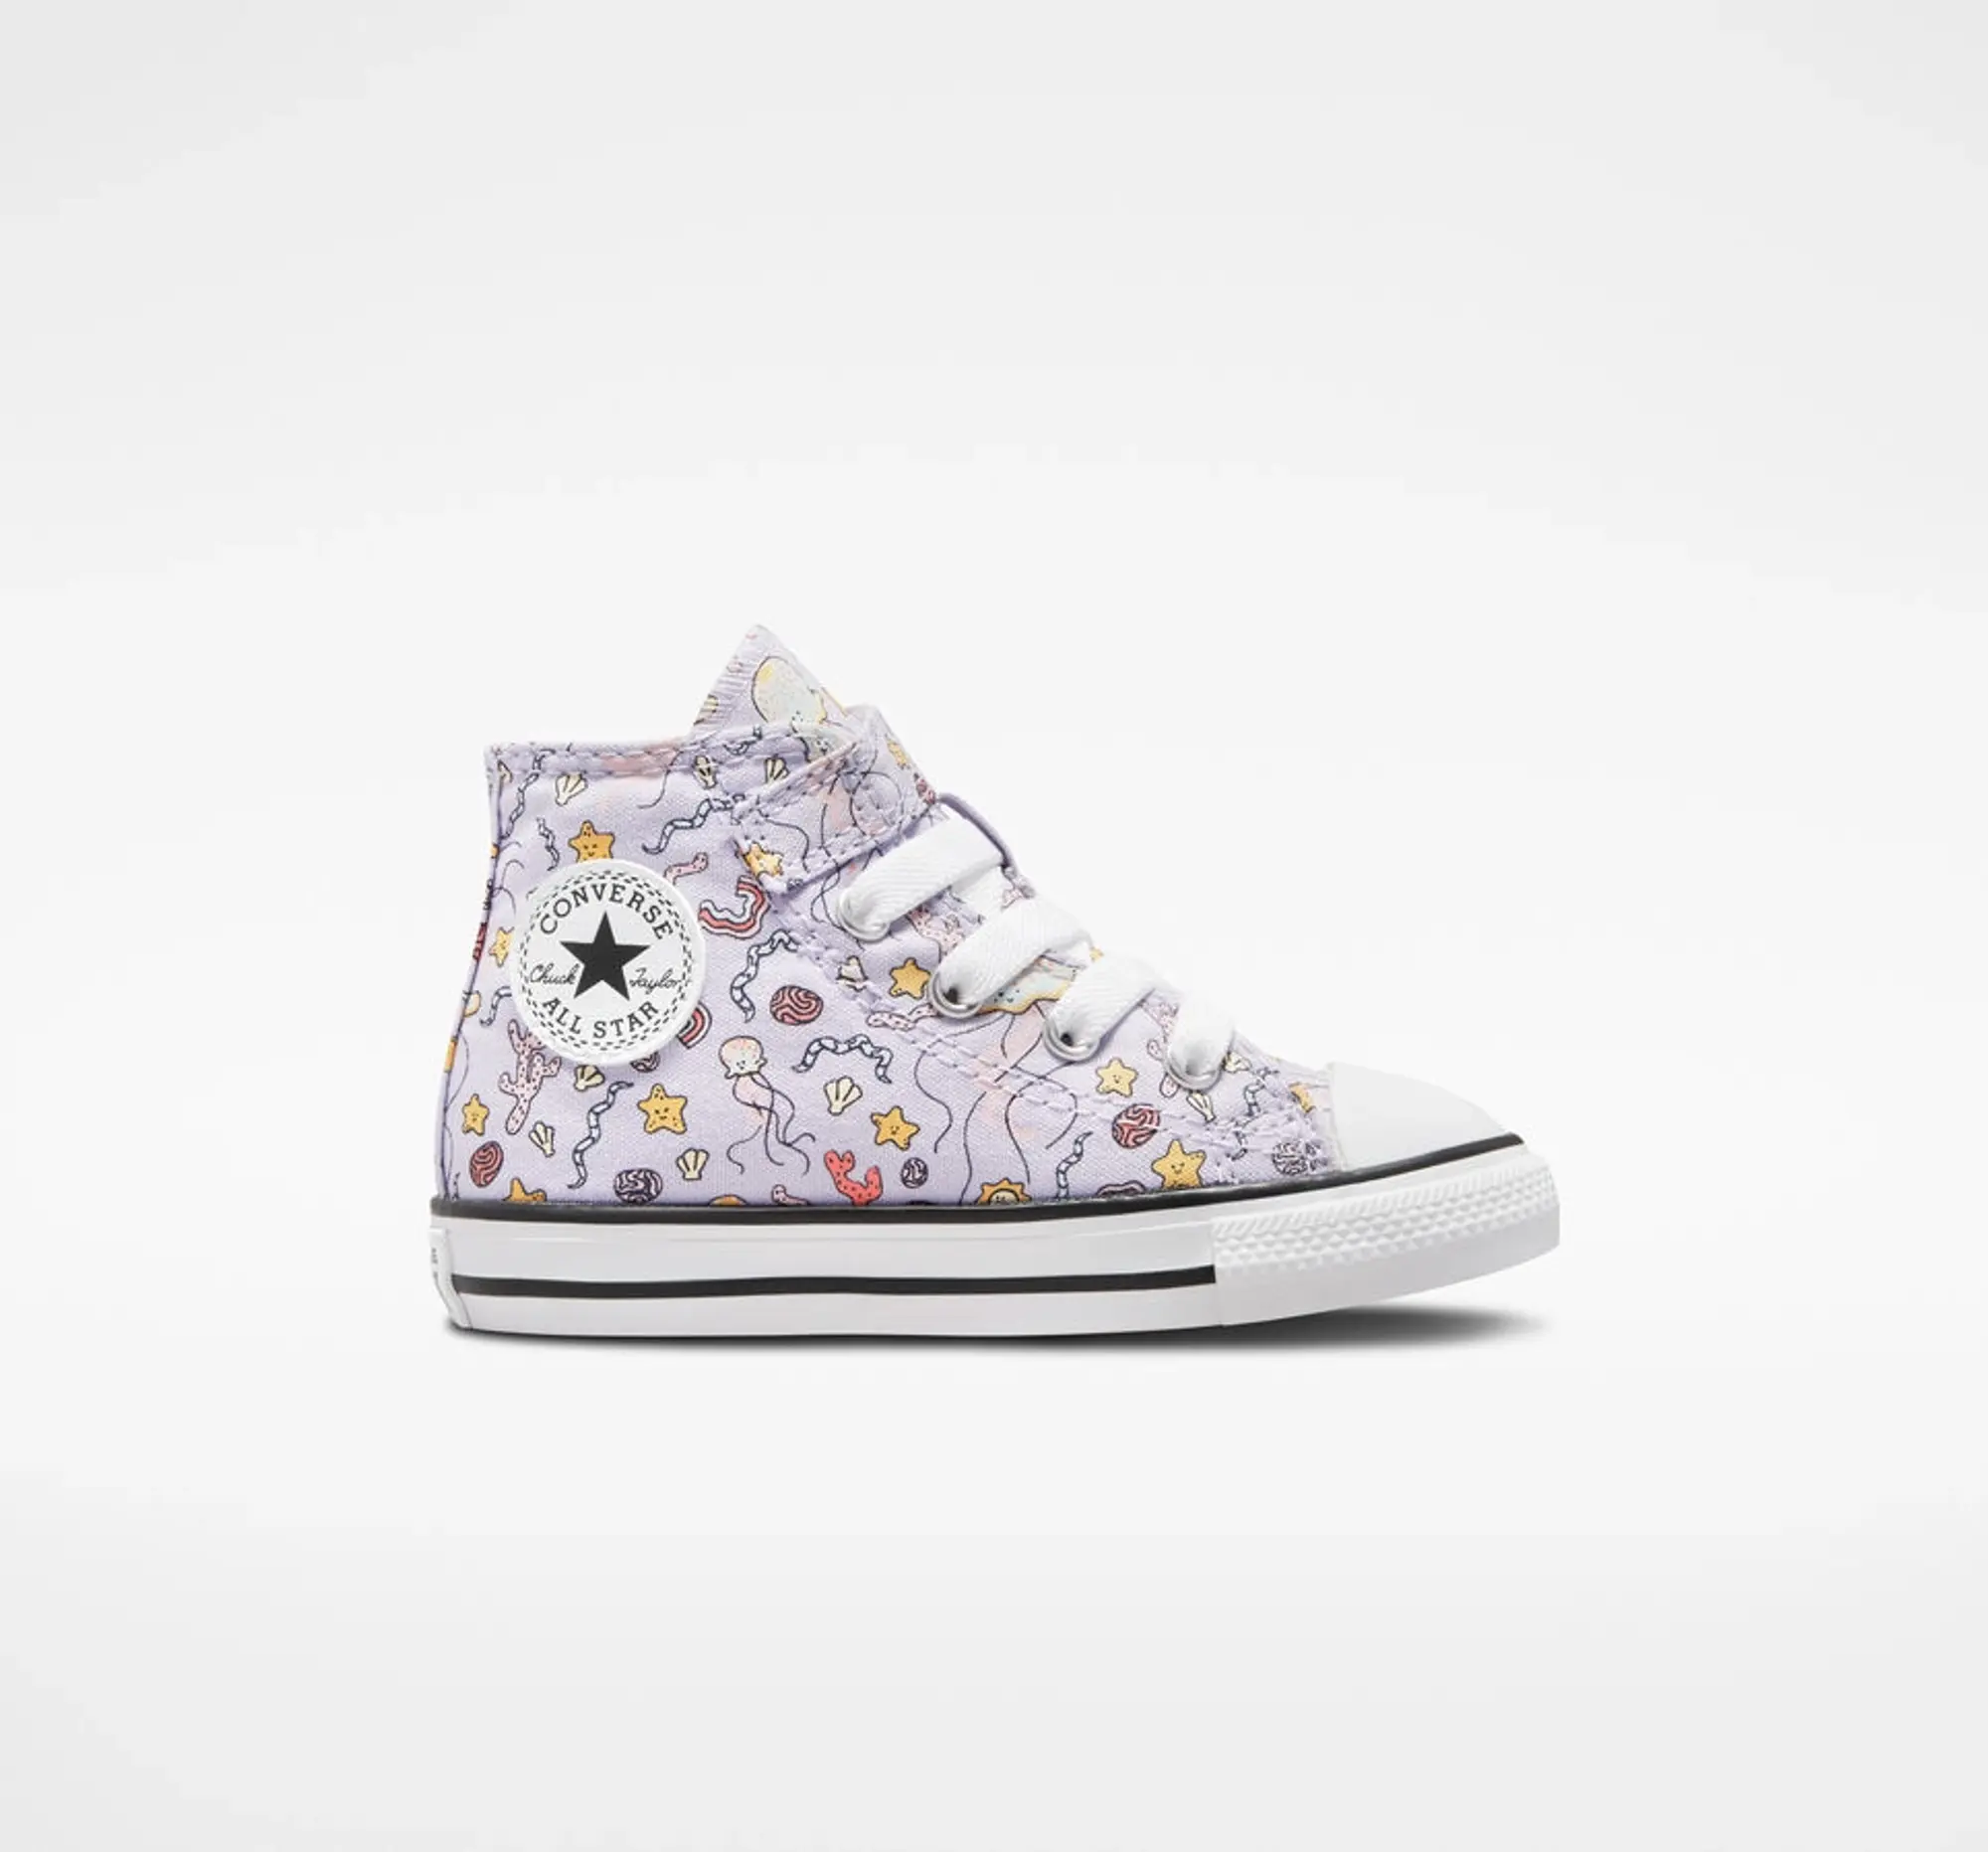 Converse lilac all star hi 1v majestic Girls Toddler Trainers